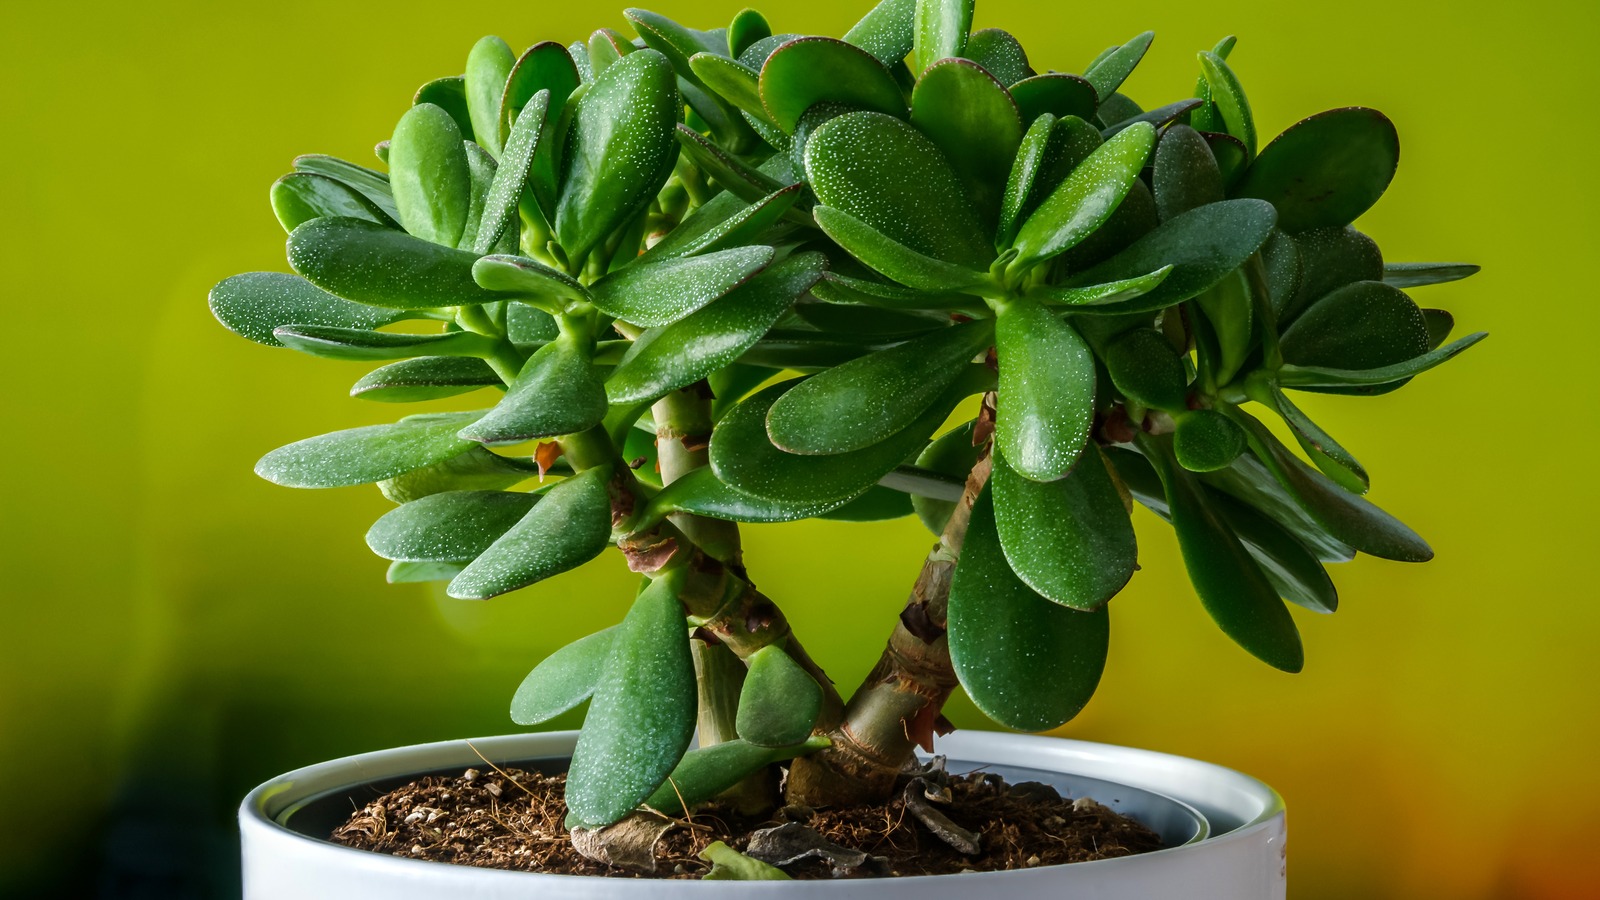 Jade Plant Problems - What To Do For Black Spots On Jade Plant Leaves